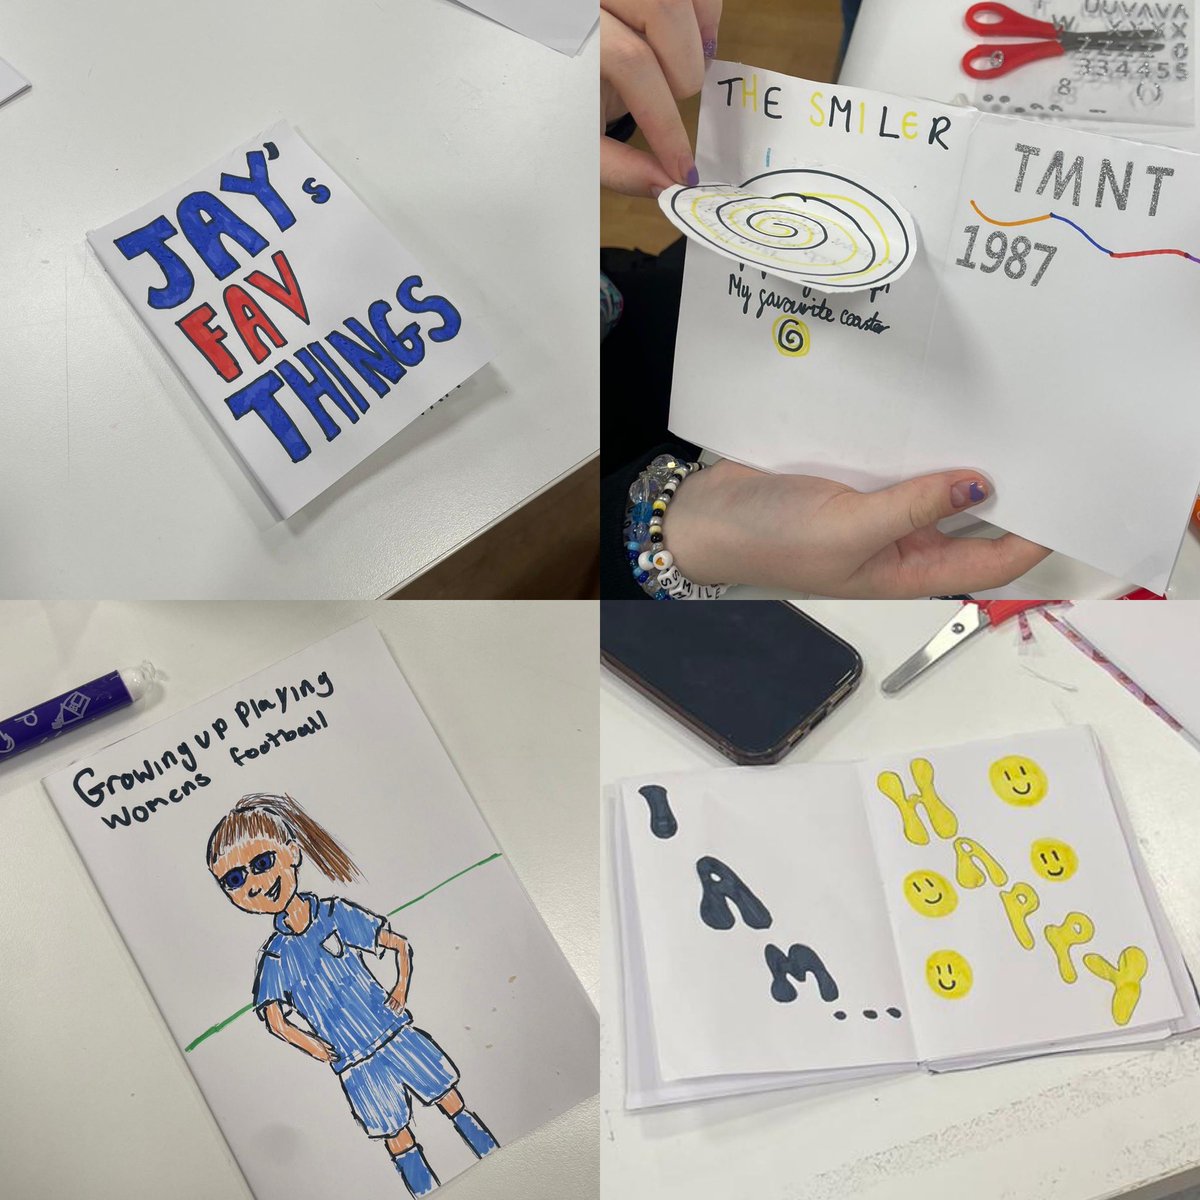 At #TheSpace tonight our amazing ASW showed us how to make a ‘zine’ young people made theirs on things that were important to them as individuals #MentalHealthAndWellbeing #ThisIsYouthWork #CoatbridgeYouthWork @NLCYouthwork